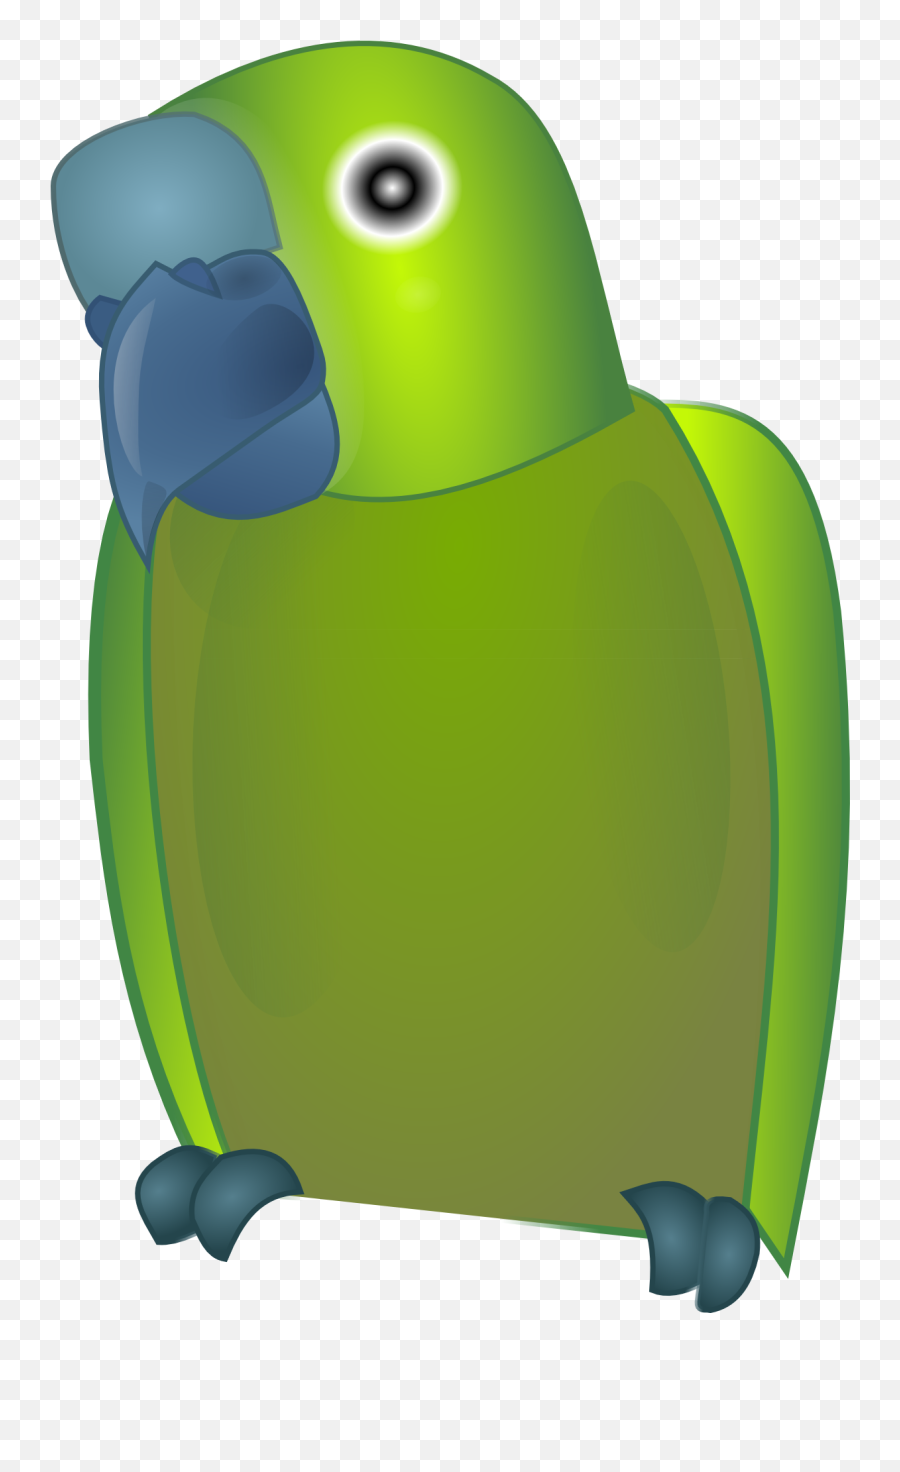 Drawing Of A Tropical Cartoon Green Parrot Free Image Download Emoji,Creative Commons Clipart Emotions